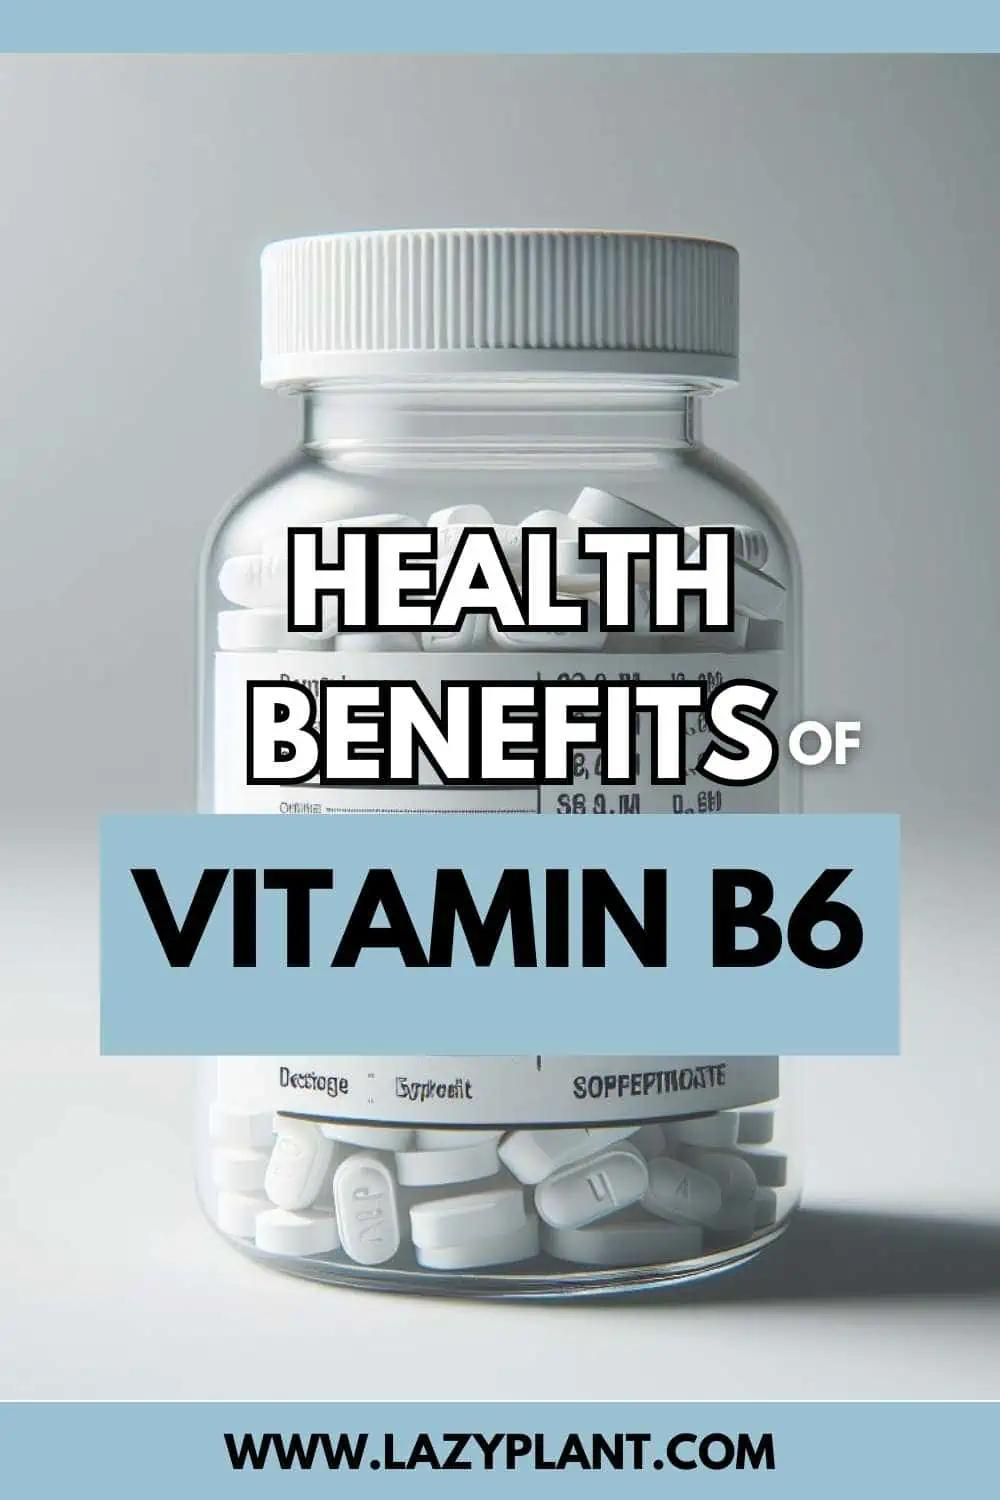 Vitamin B6: How much should I get from supplements?